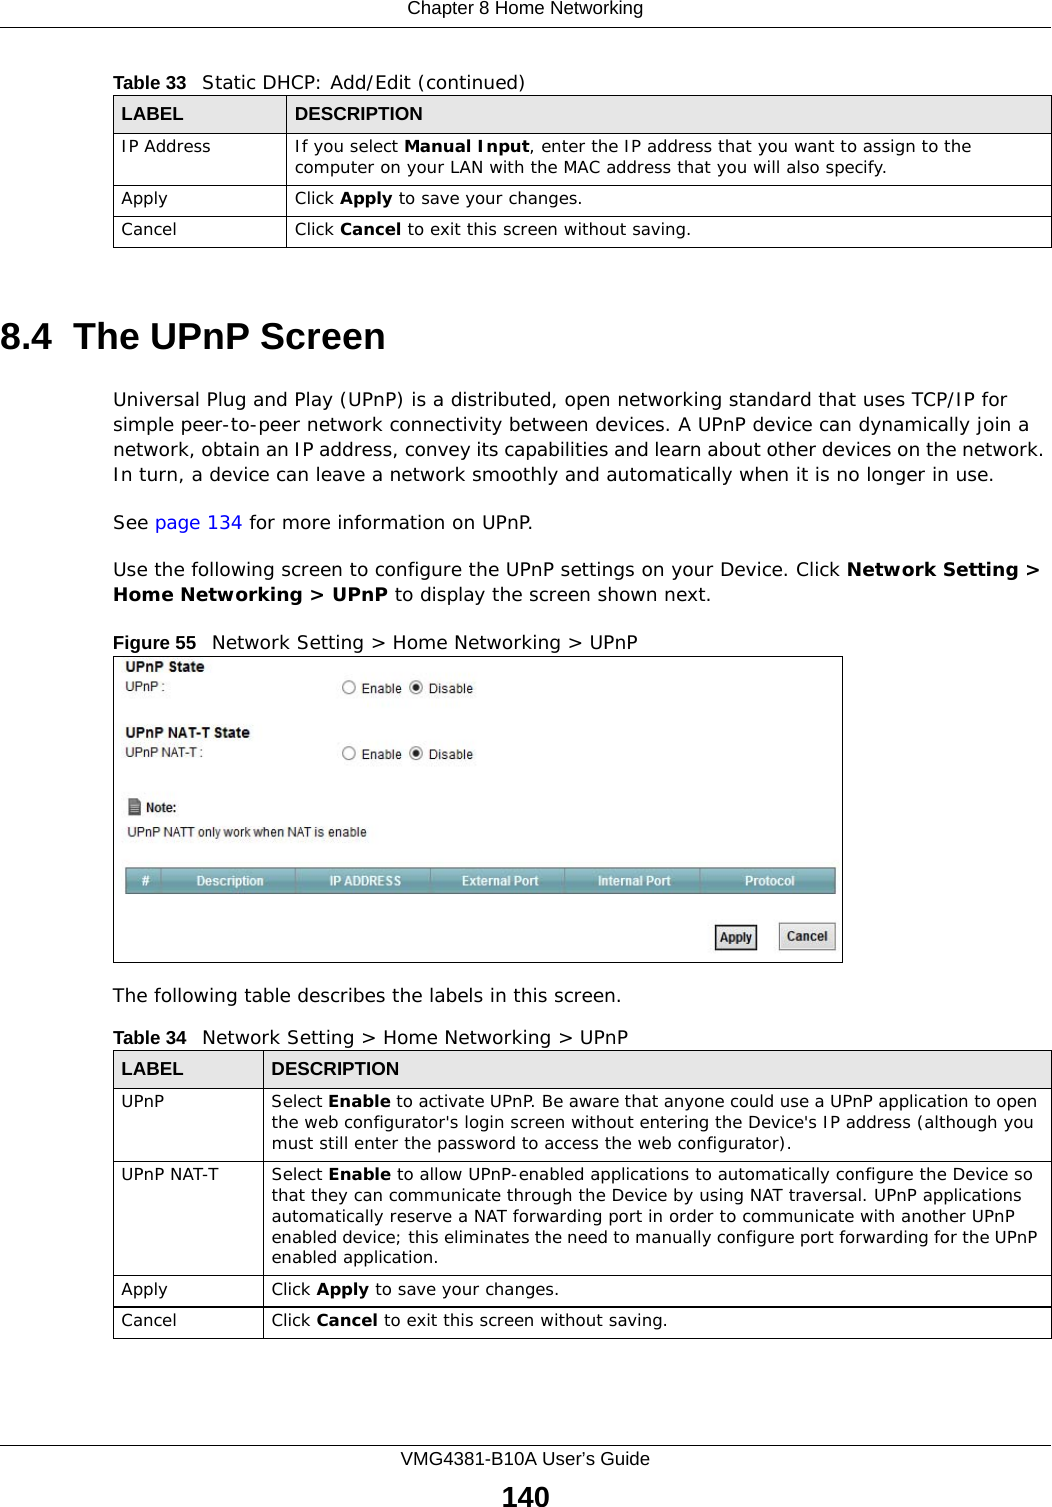 Chapter 8 Home NetworkingVMG4381-B10A User’s Guide1408.4  The UPnP ScreenUniversal Plug and Play (UPnP) is a distributed, open networking standard that uses TCP/IP for simple peer-to-peer network connectivity between devices. A UPnP device can dynamically join a network, obtain an IP address, convey its capabilities and learn about other devices on the network. In turn, a device can leave a network smoothly and automatically when it is no longer in use.See page 134 for more information on UPnP.Use the following screen to configure the UPnP settings on your Device. Click Network Setting &gt; Home Networking &gt; UPnP to display the screen shown next.Figure 55   Network Setting &gt; Home Networking &gt; UPnPThe following table describes the labels in this screen.IP Address If you select Manual Input, enter the IP address that you want to assign to the computer on your LAN with the MAC address that you will also specify.Apply Click Apply to save your changes.Cancel Click Cancel to exit this screen without saving.Table 33   Static DHCP: Add/Edit (continued)LABEL DESCRIPTIONTable 34   Network Setting &gt; Home Networking &gt; UPnPLABEL DESCRIPTIONUPnP Select Enable to activate UPnP. Be aware that anyone could use a UPnP application to open the web configurator&apos;s login screen without entering the Device&apos;s IP address (although you must still enter the password to access the web configurator).UPnP NAT-T Select Enable to allow UPnP-enabled applications to automatically configure the Device so that they can communicate through the Device by using NAT traversal. UPnP applications automatically reserve a NAT forwarding port in order to communicate with another UPnP enabled device; this eliminates the need to manually configure port forwarding for the UPnP enabled application. Apply Click Apply to save your changes.Cancel Click Cancel to exit this screen without saving.